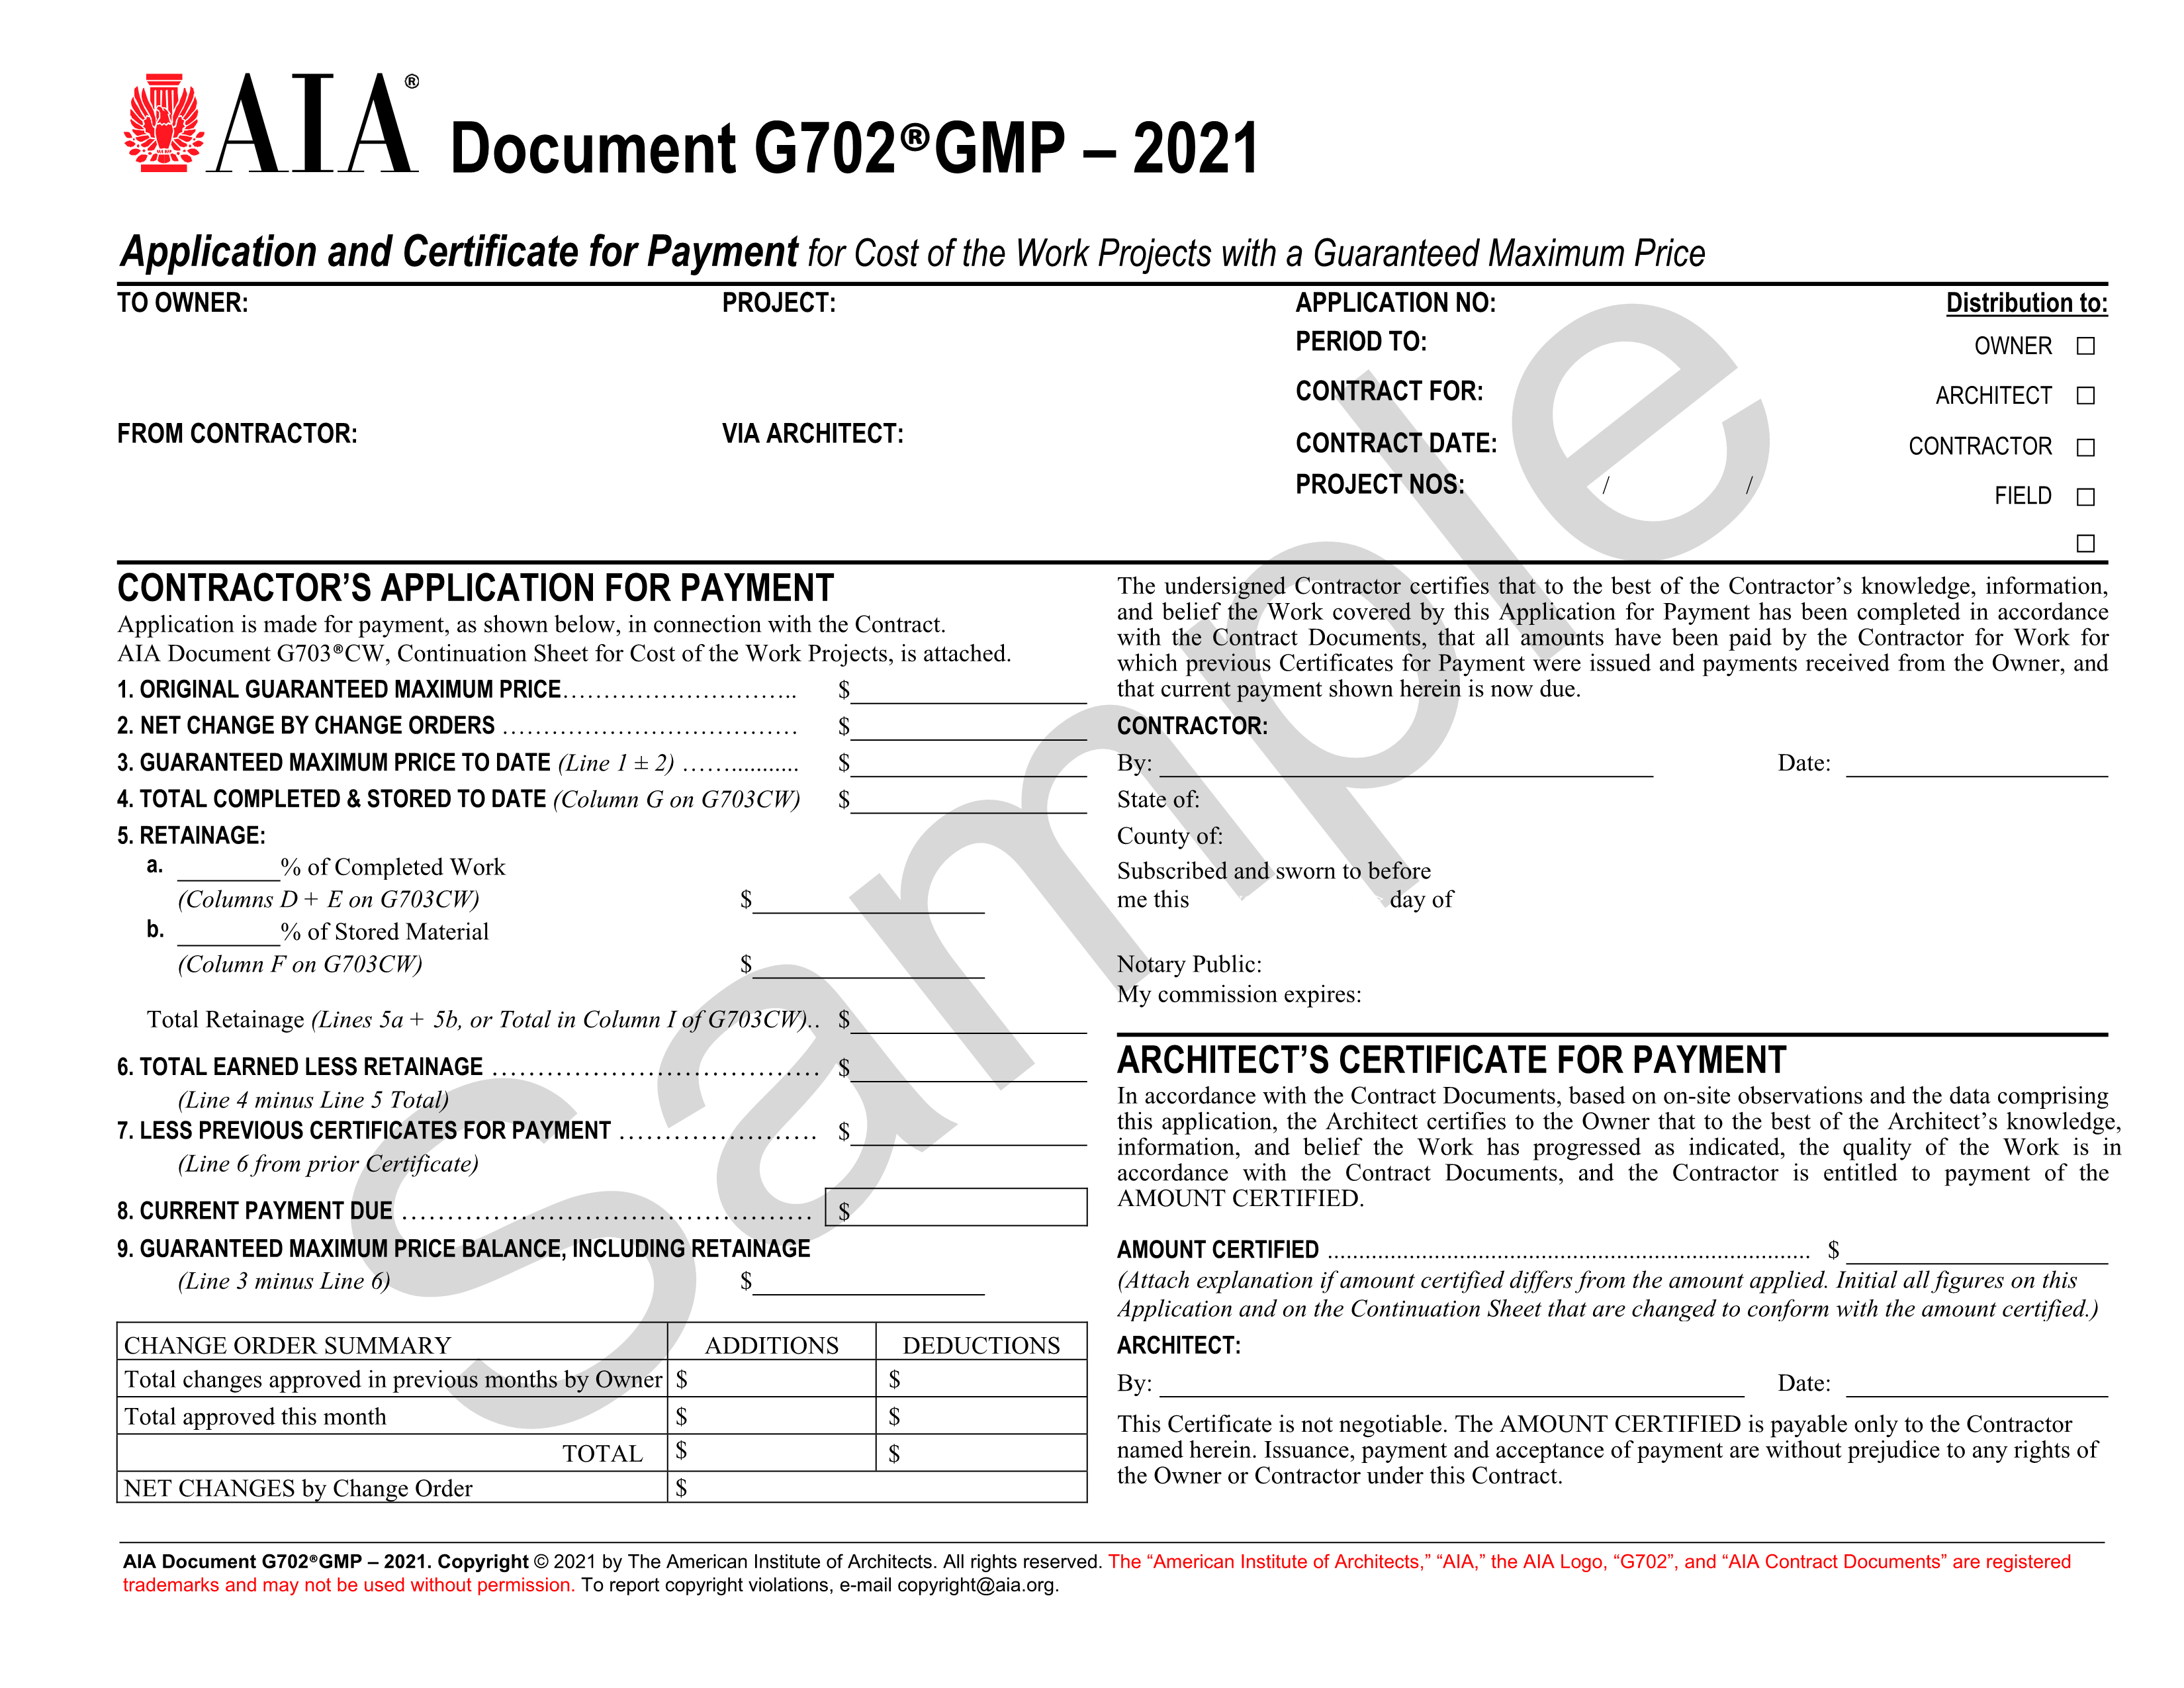 aia-g702-gmp-application-and-certificate-for-payment-gmp-industry